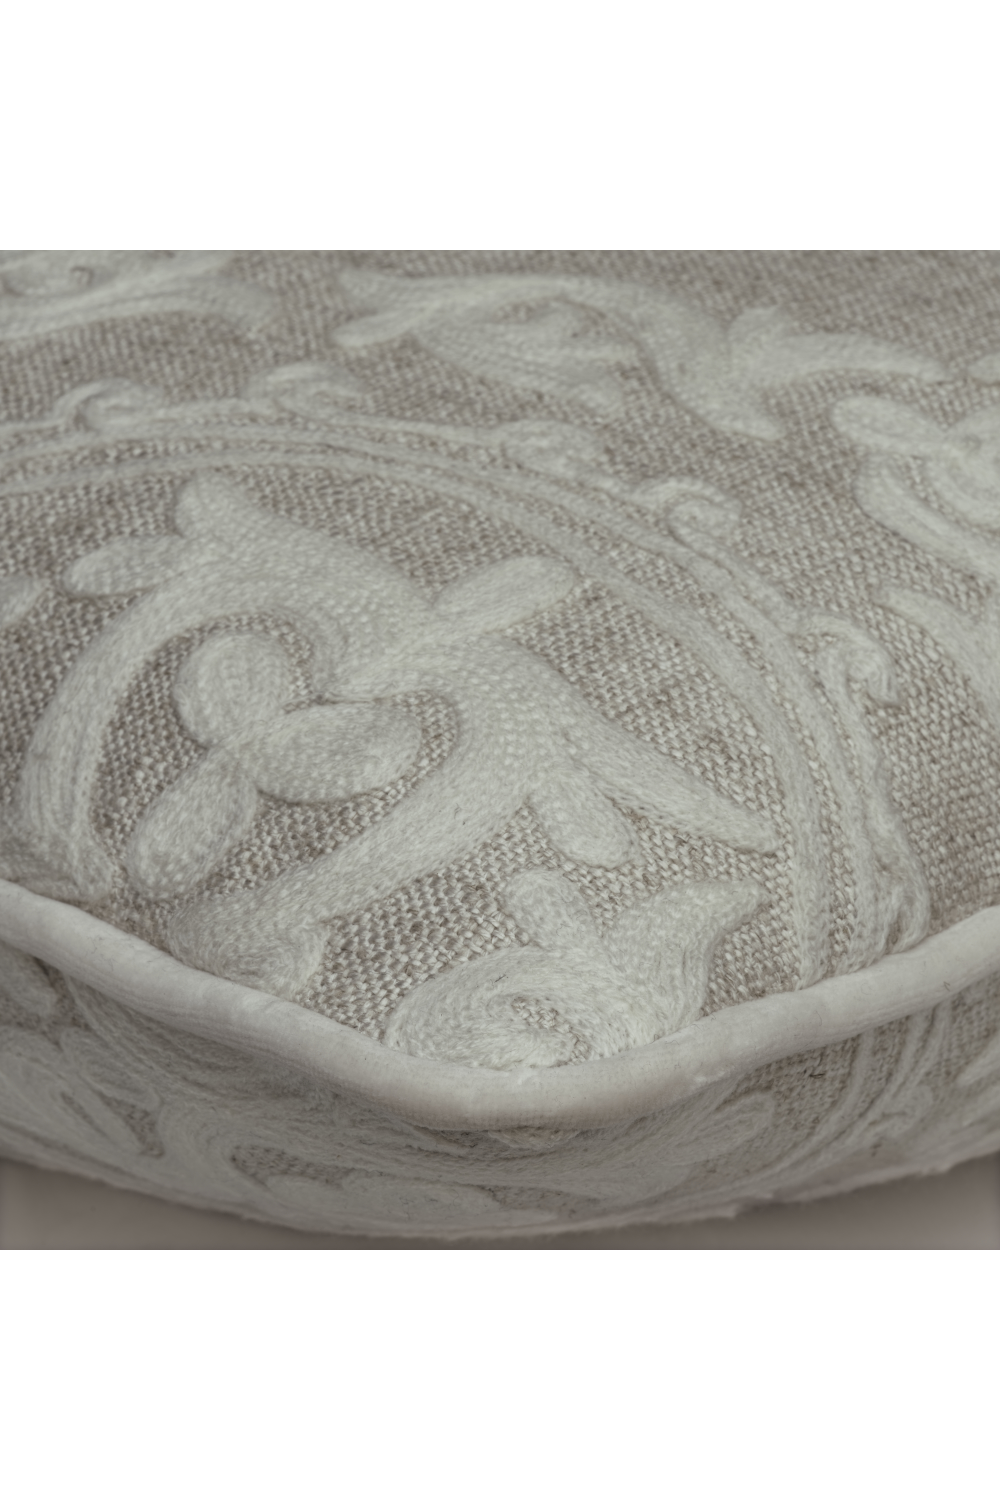 Floral Embroidered Linen Cushion | Andrew Martin Yurt | Oroa.com